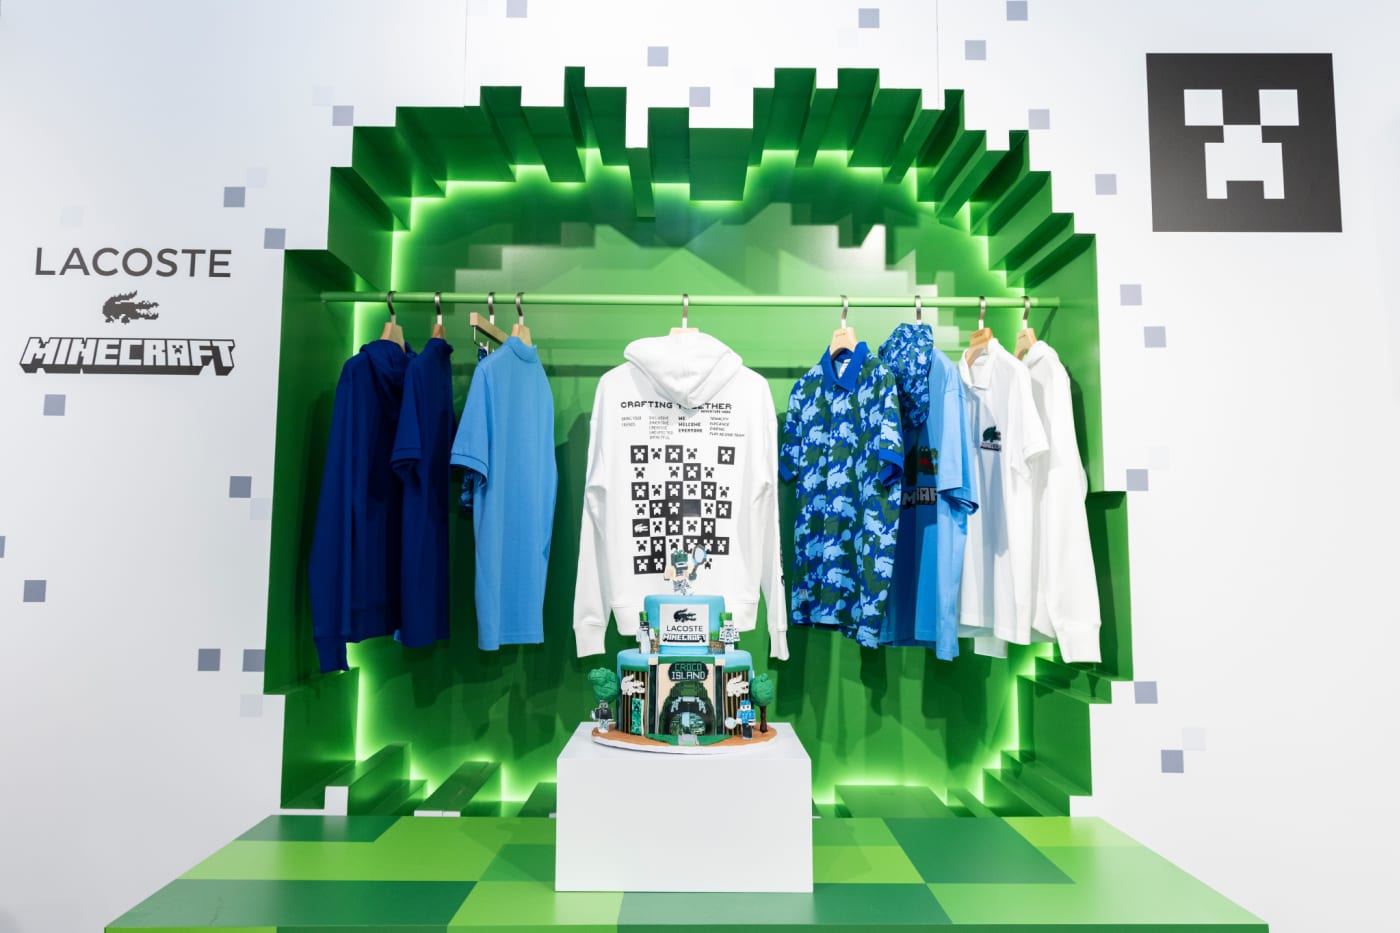 Lacoste Took Its Minecraft Collab Stateside With an NYC Event | Complex